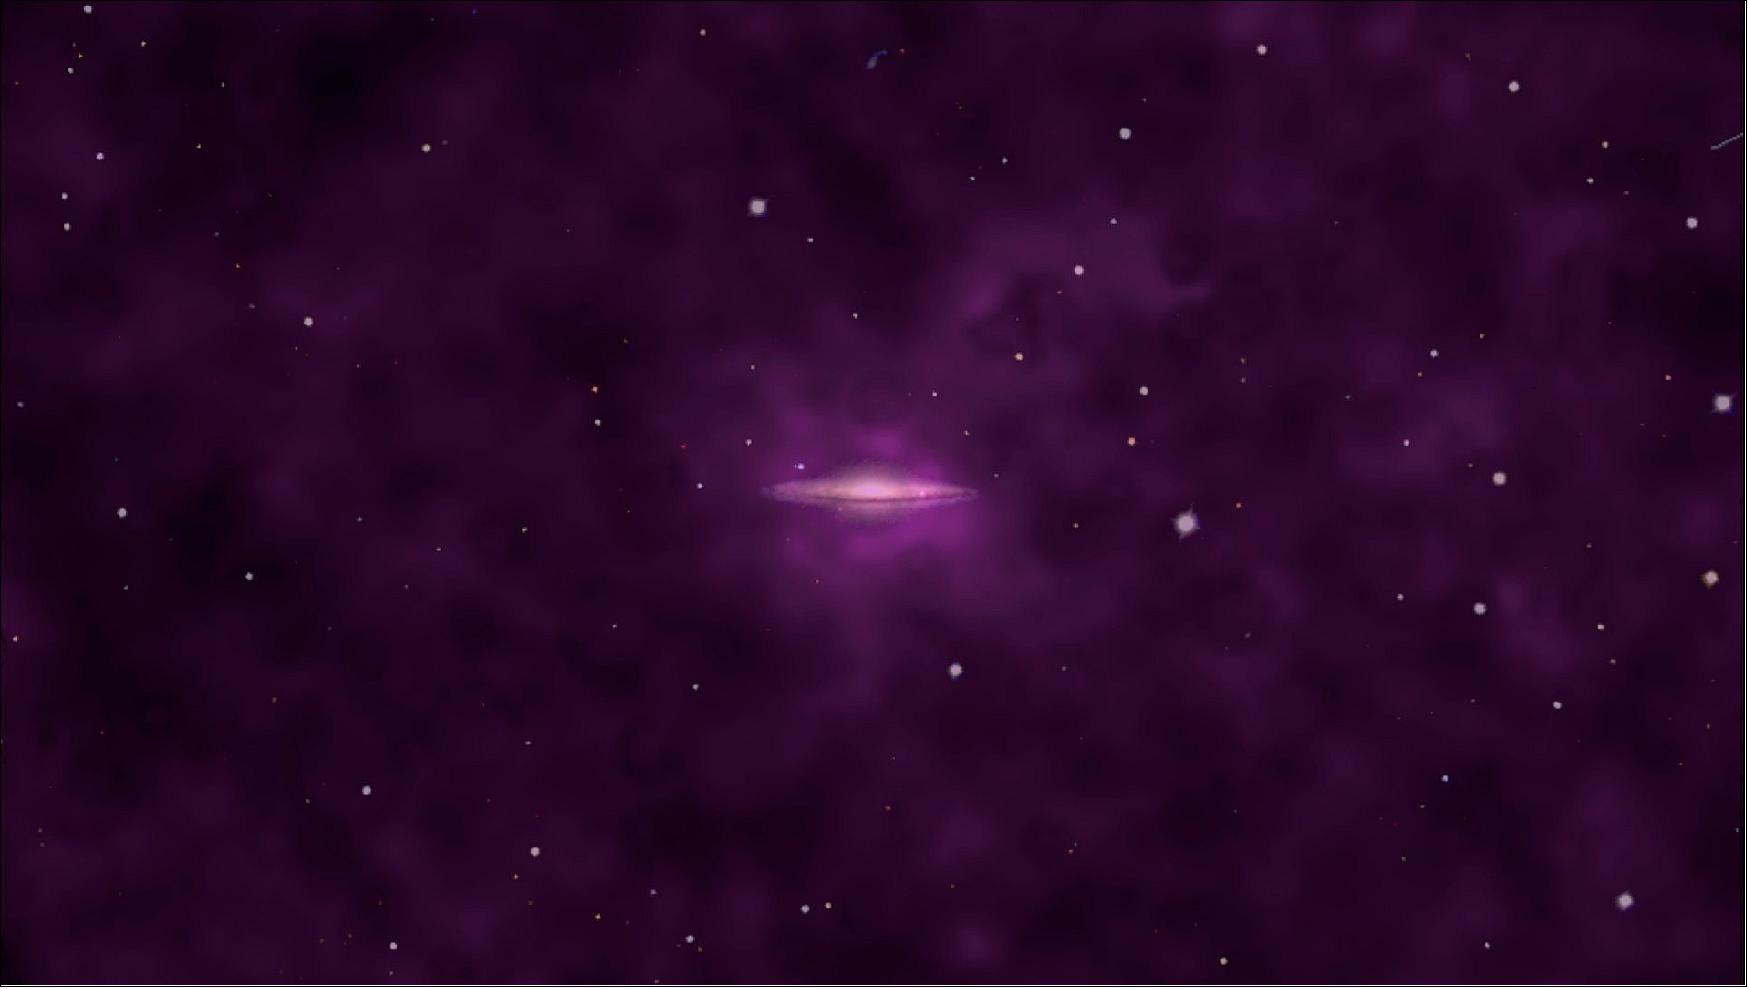 Figure 84: This image illustrates the X-ray emission around a set of five galaxies that have been stacked together to bring out the details in their spherical, gaseous haloes. It was created by a team of scientists using ESA’s XMM-Newton space observatory, with the X-ray emission highlighted in purple [image credit: ESA/XMM-Newton; J-T. Li (University of Michigan, USA); Sloan Digital Sky Survey (SDSS)] 92)